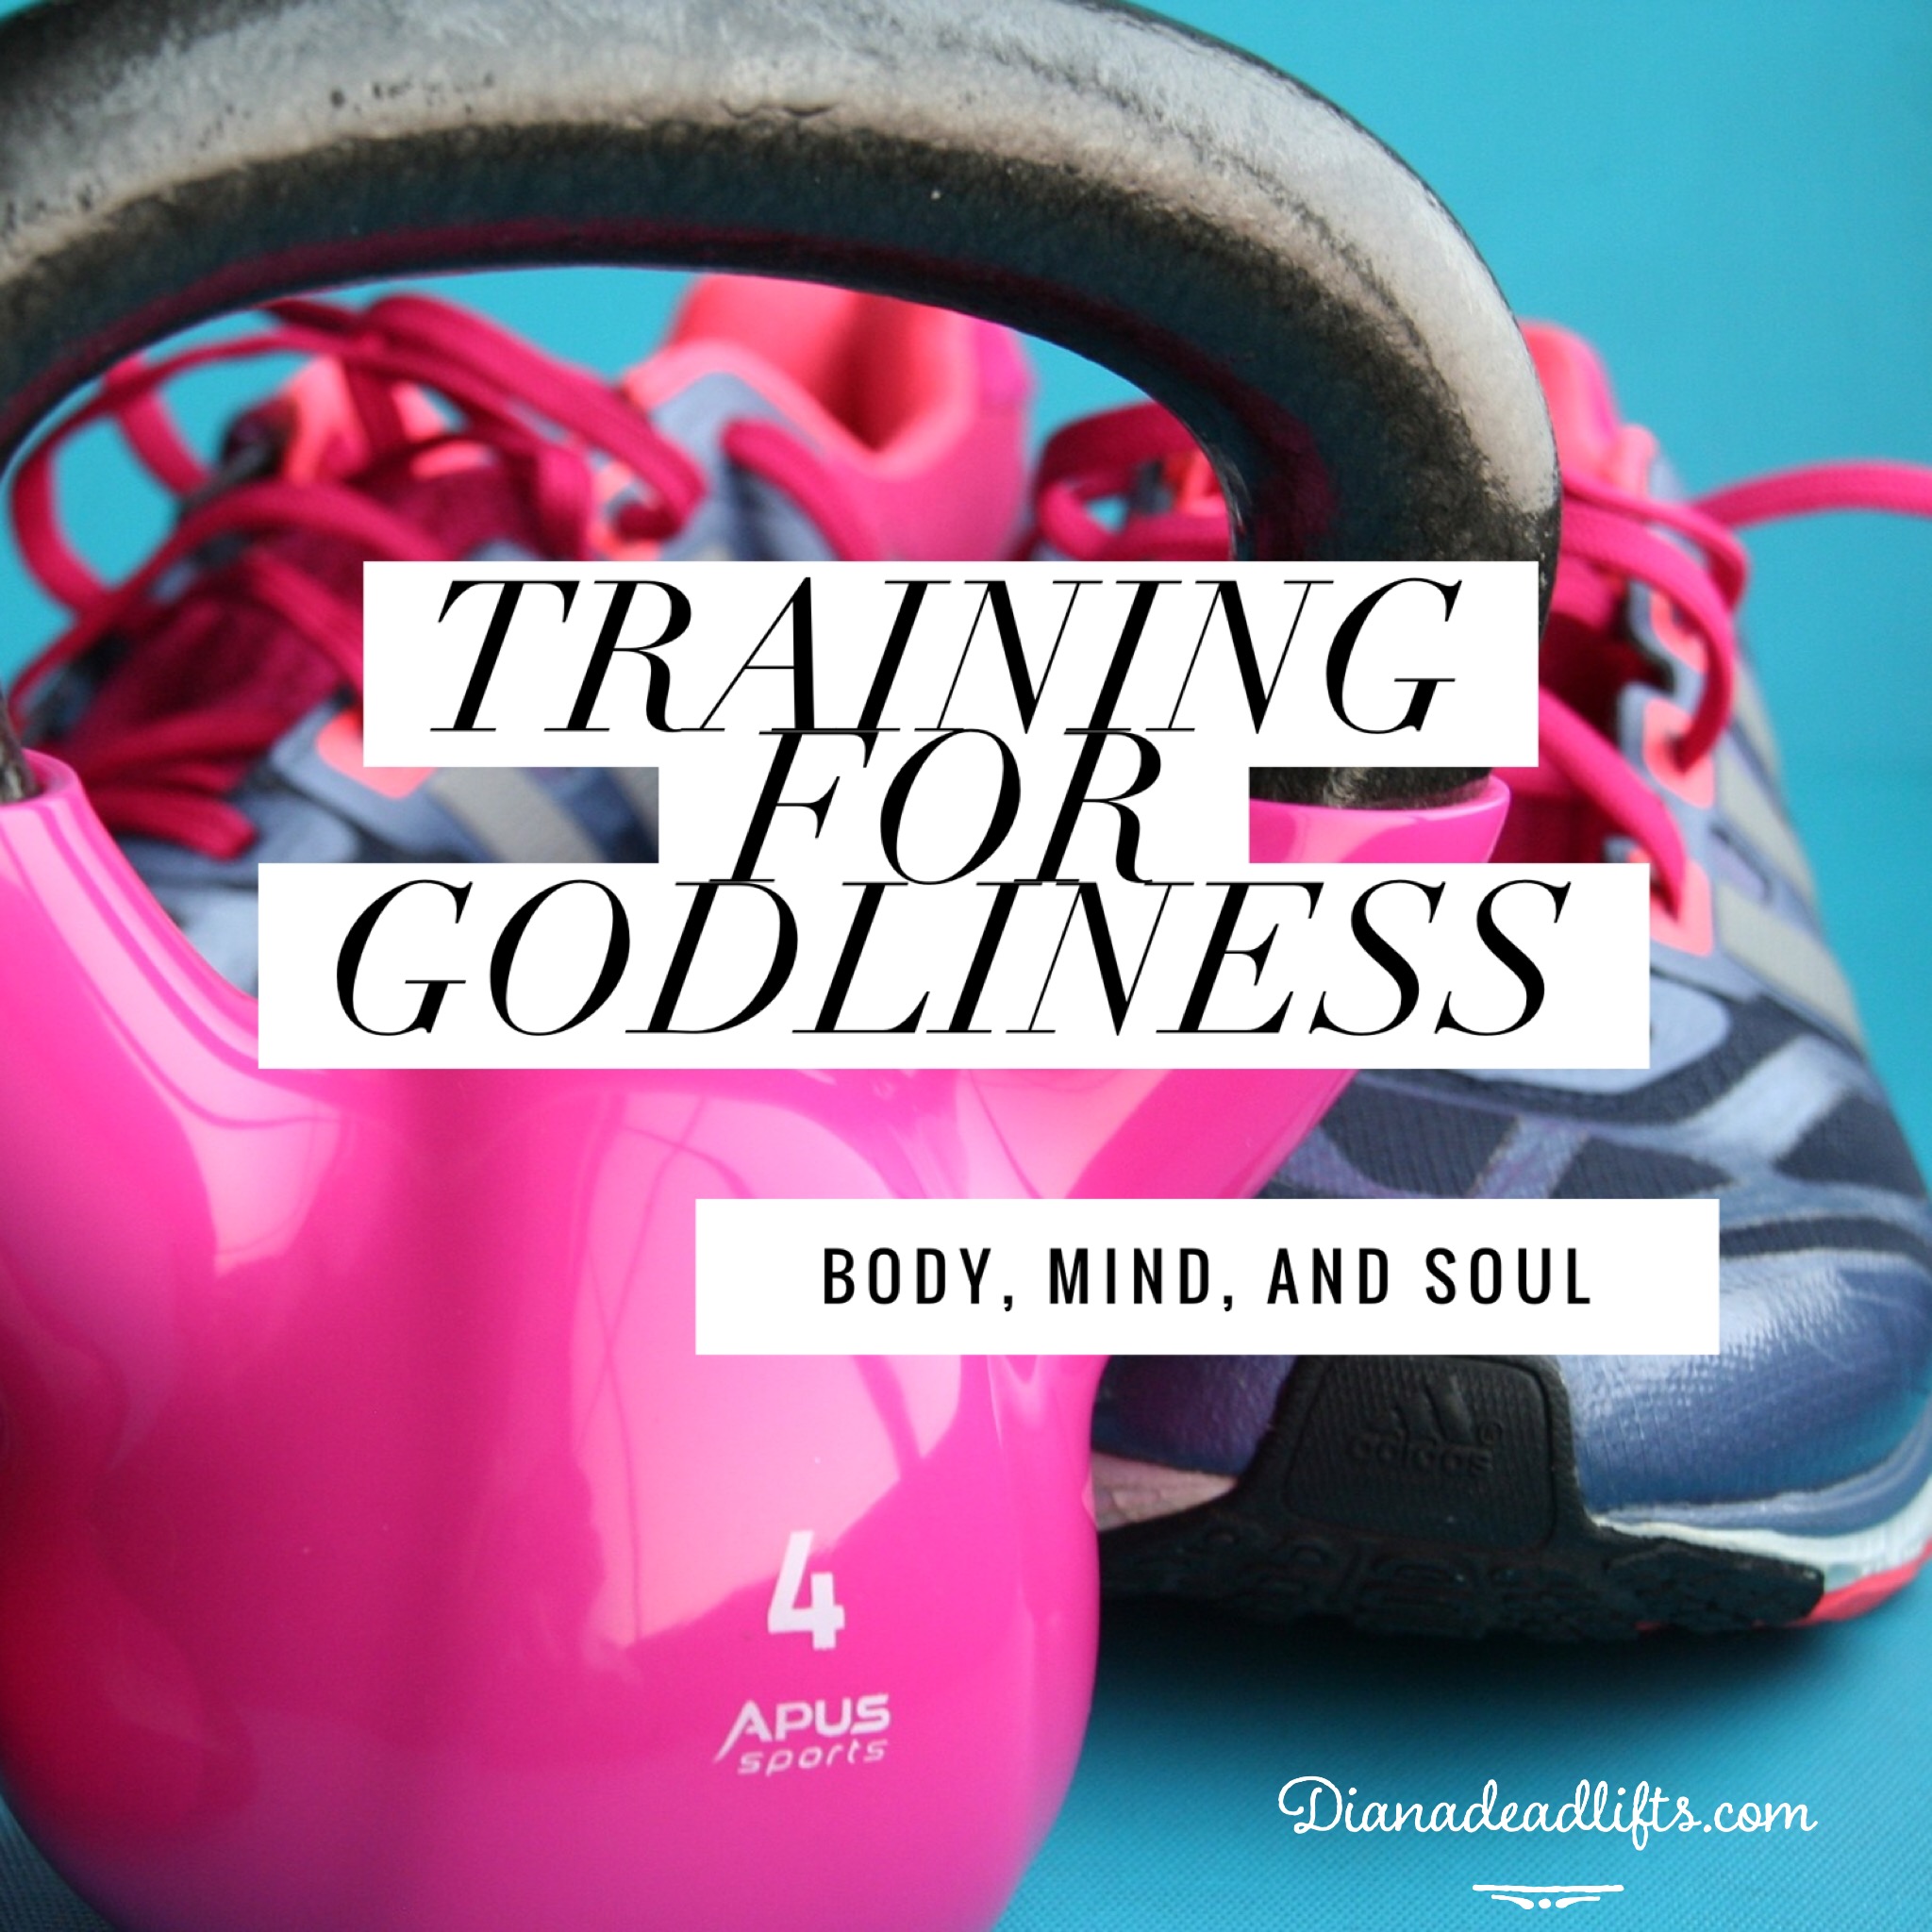 Training for Godliness - Body, Soul, and Spirit